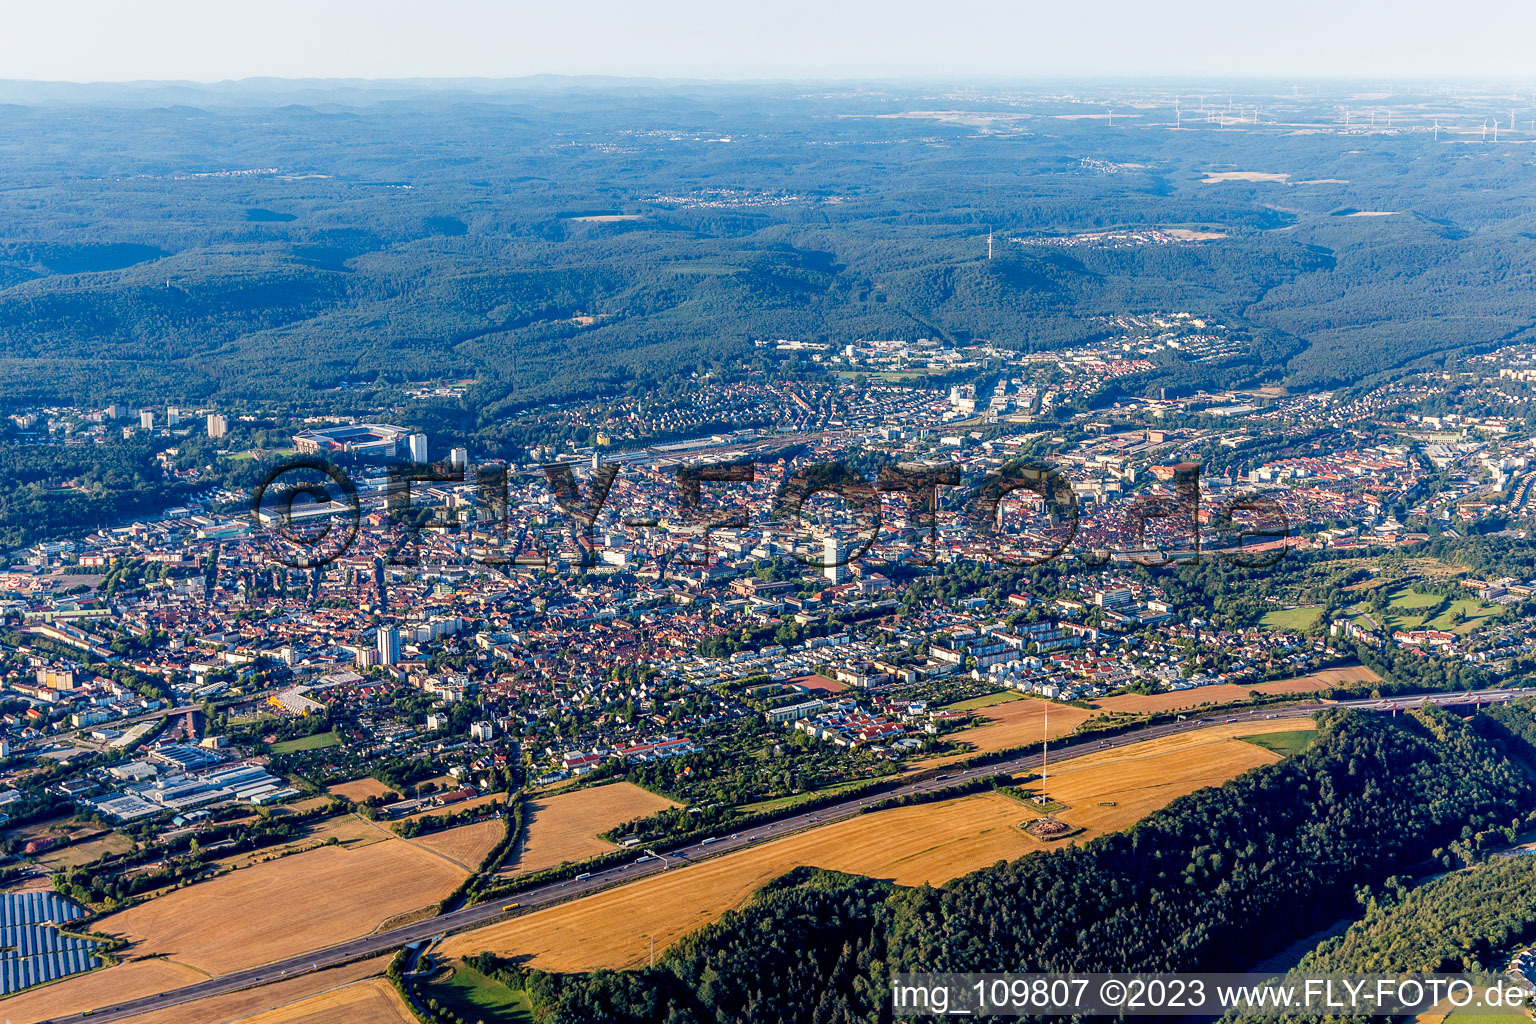 Aerial photograpy of Kaiserslautern in the state Rhineland-Palatinate, Germany